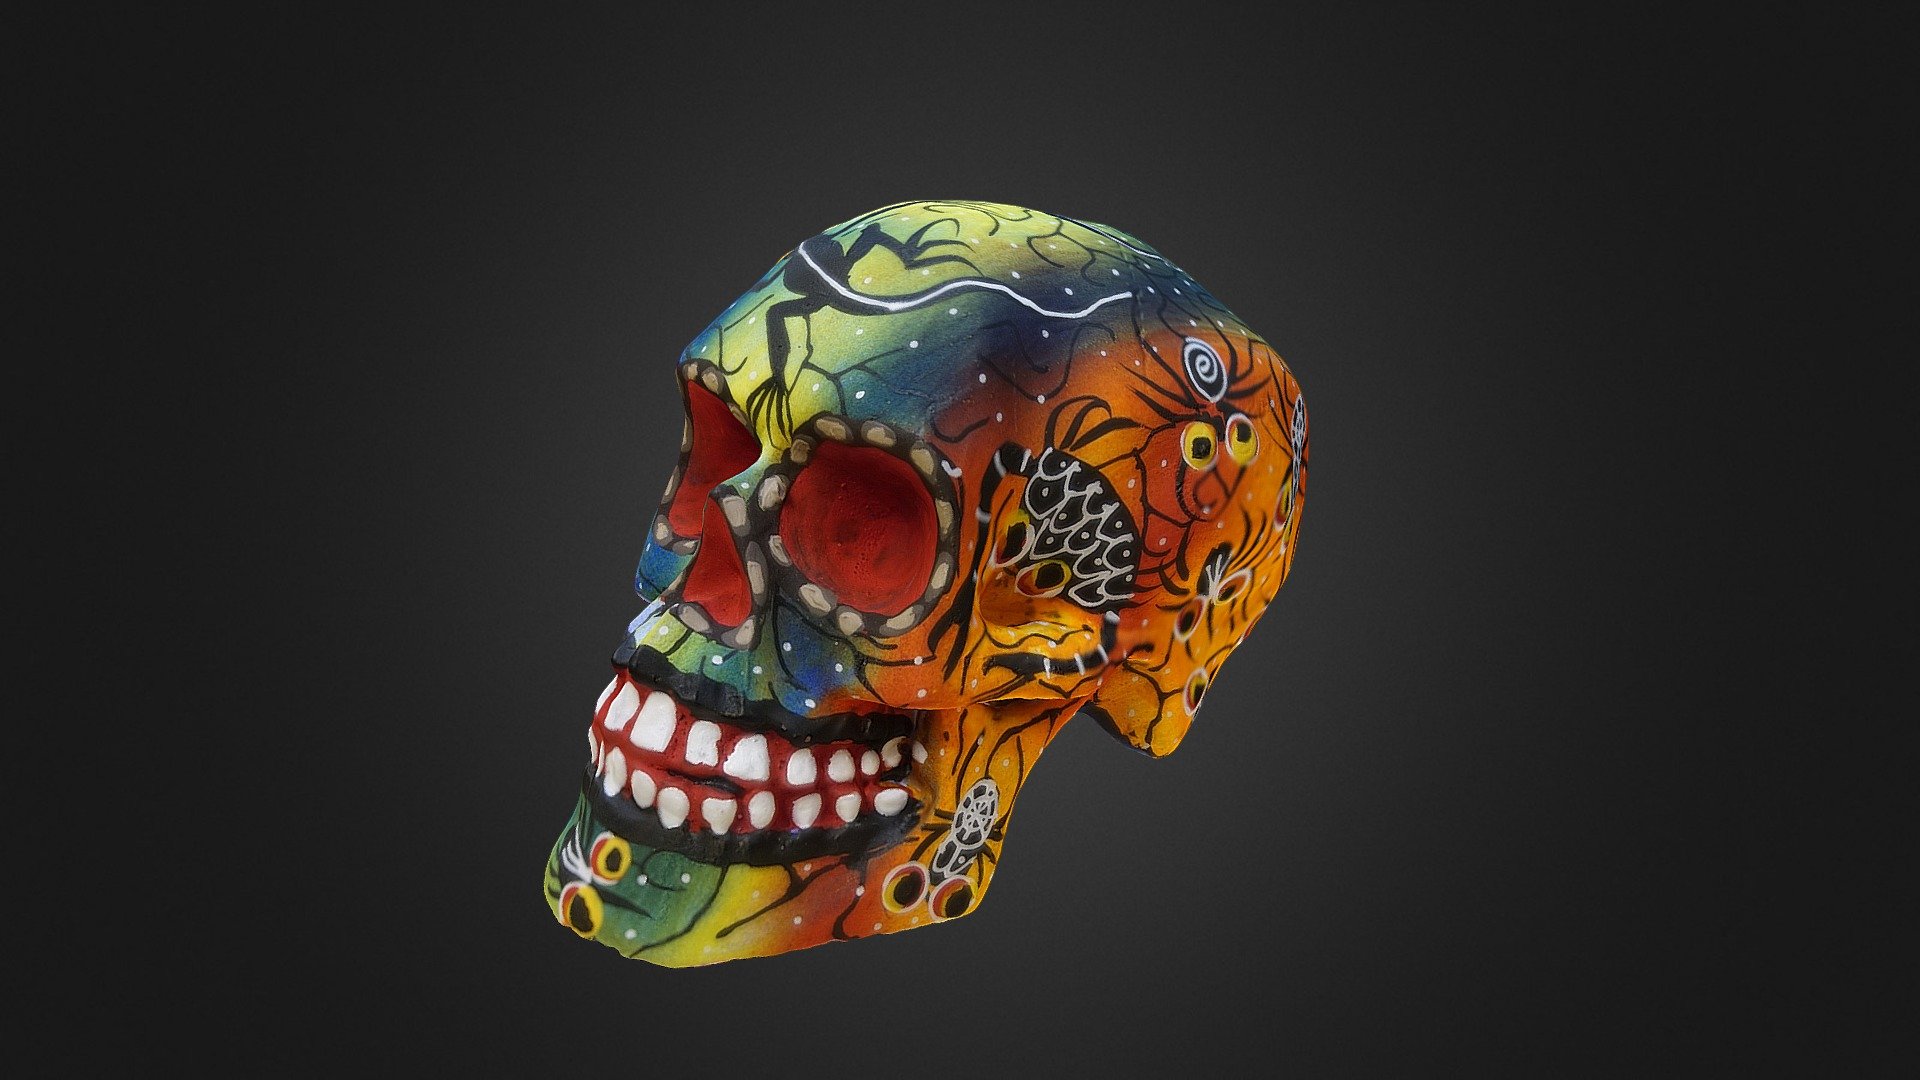 This is a beautiful hand painted Alebrije skull from Oaxaca, Mexico. This model was created using photogrammetry with a Sony mirrorless camera and Agisoft Photoscan 3d model